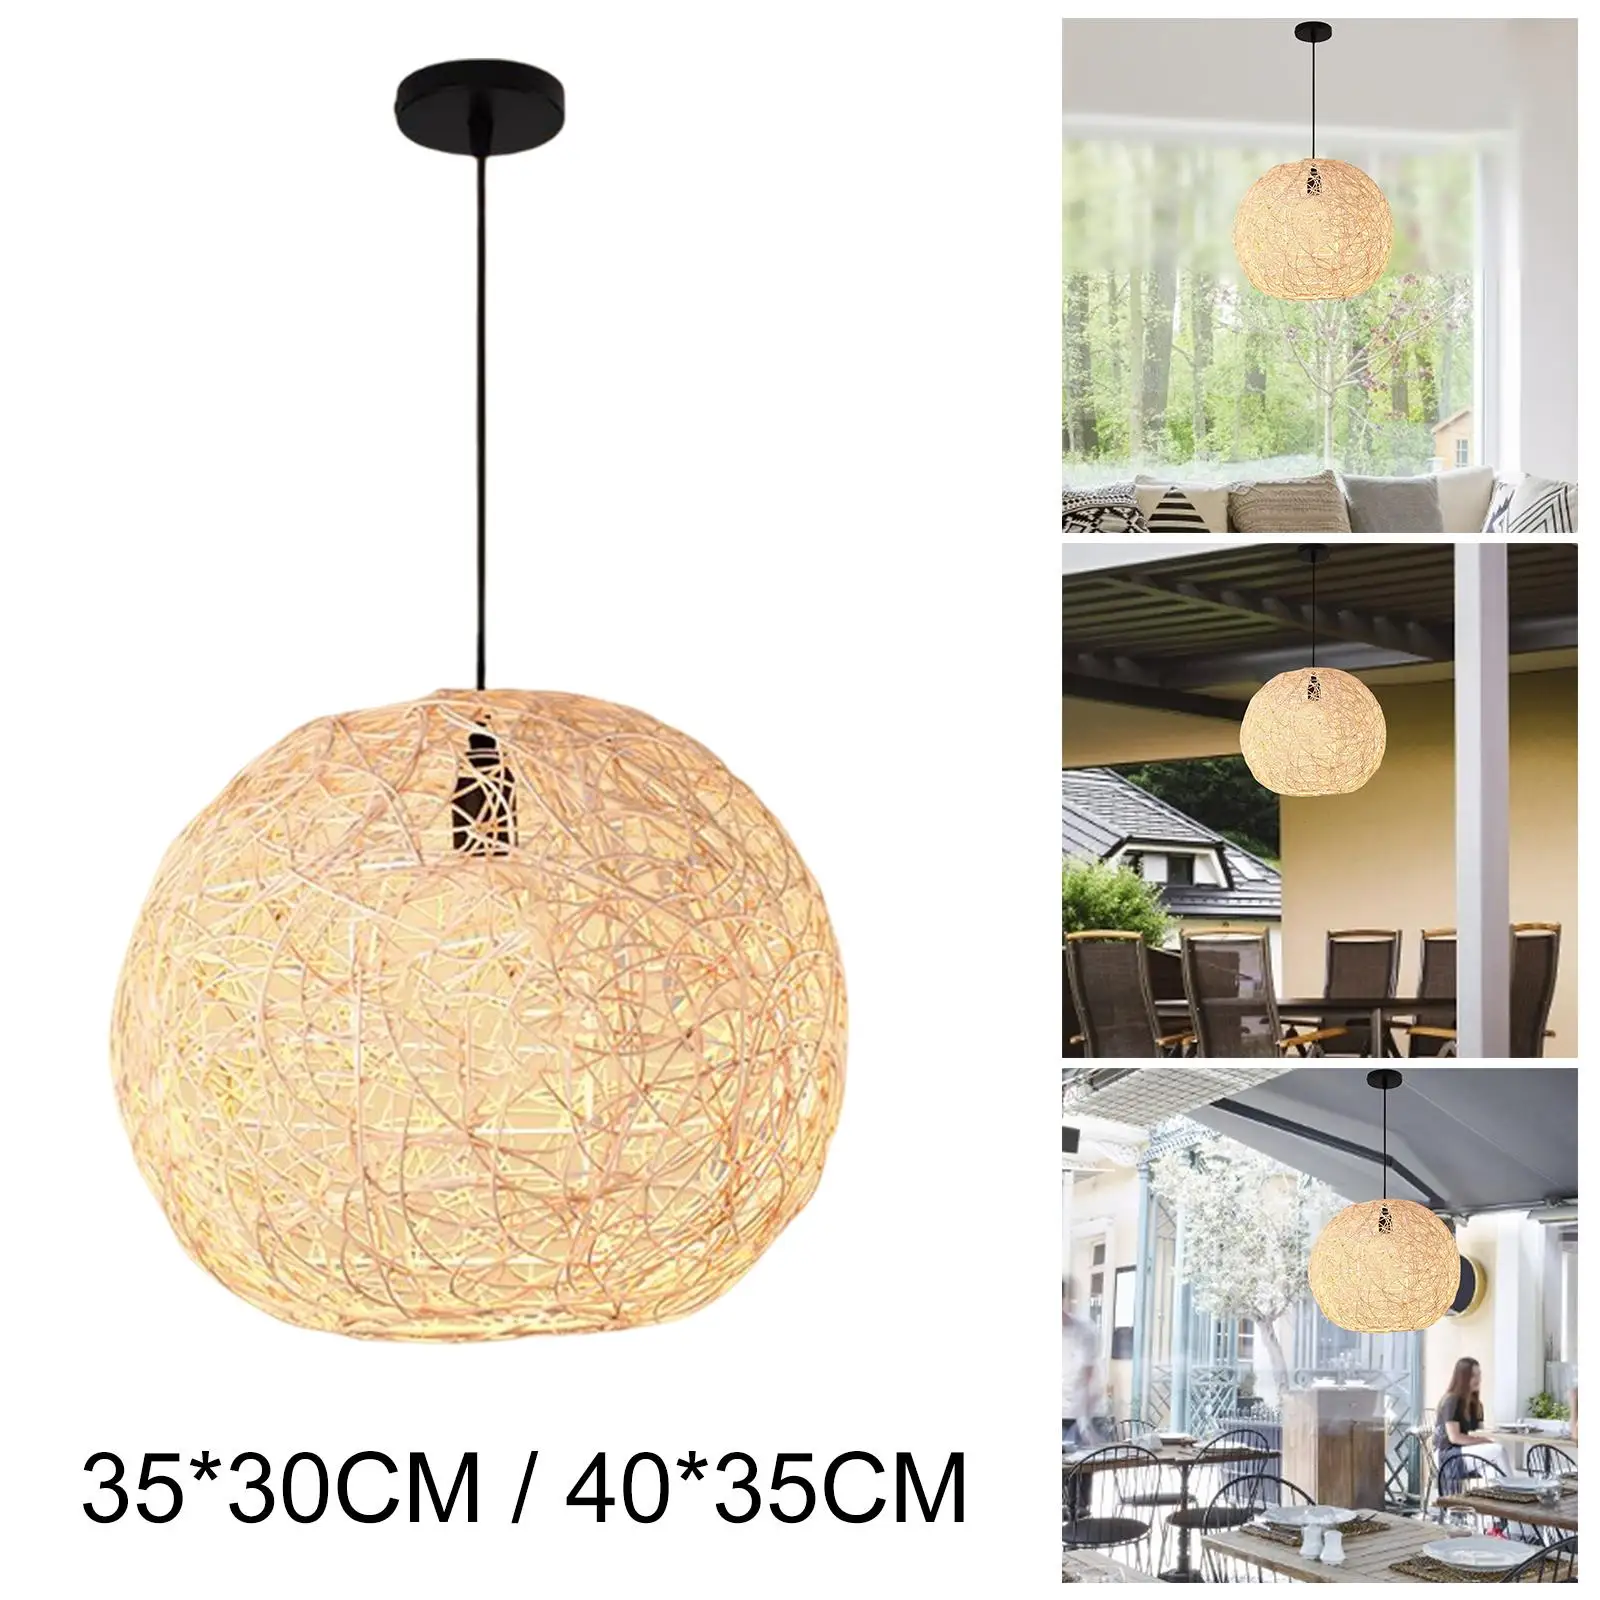 Rustic Bamboo Woven Light Shade Chandelier Cage Guard Restaurant Kitchen